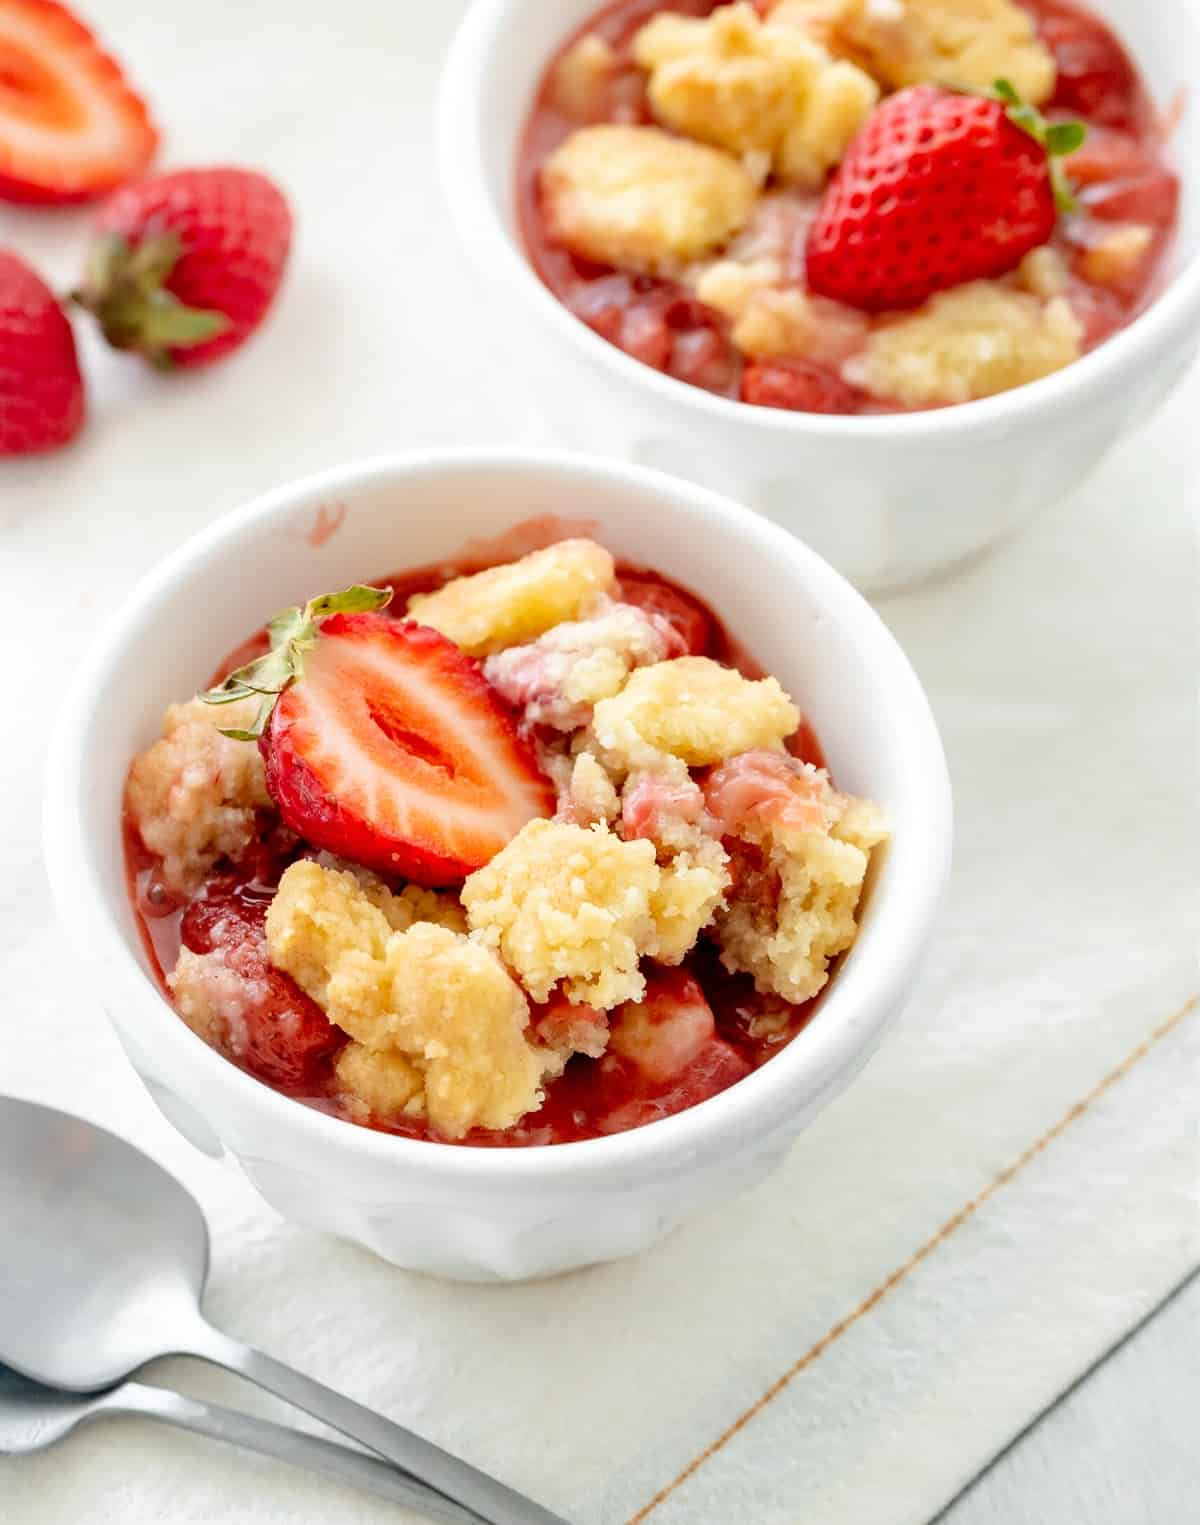 White bowls on white linen with servings of strawberry dump cake, fresh cut strawberries and silver spoon.